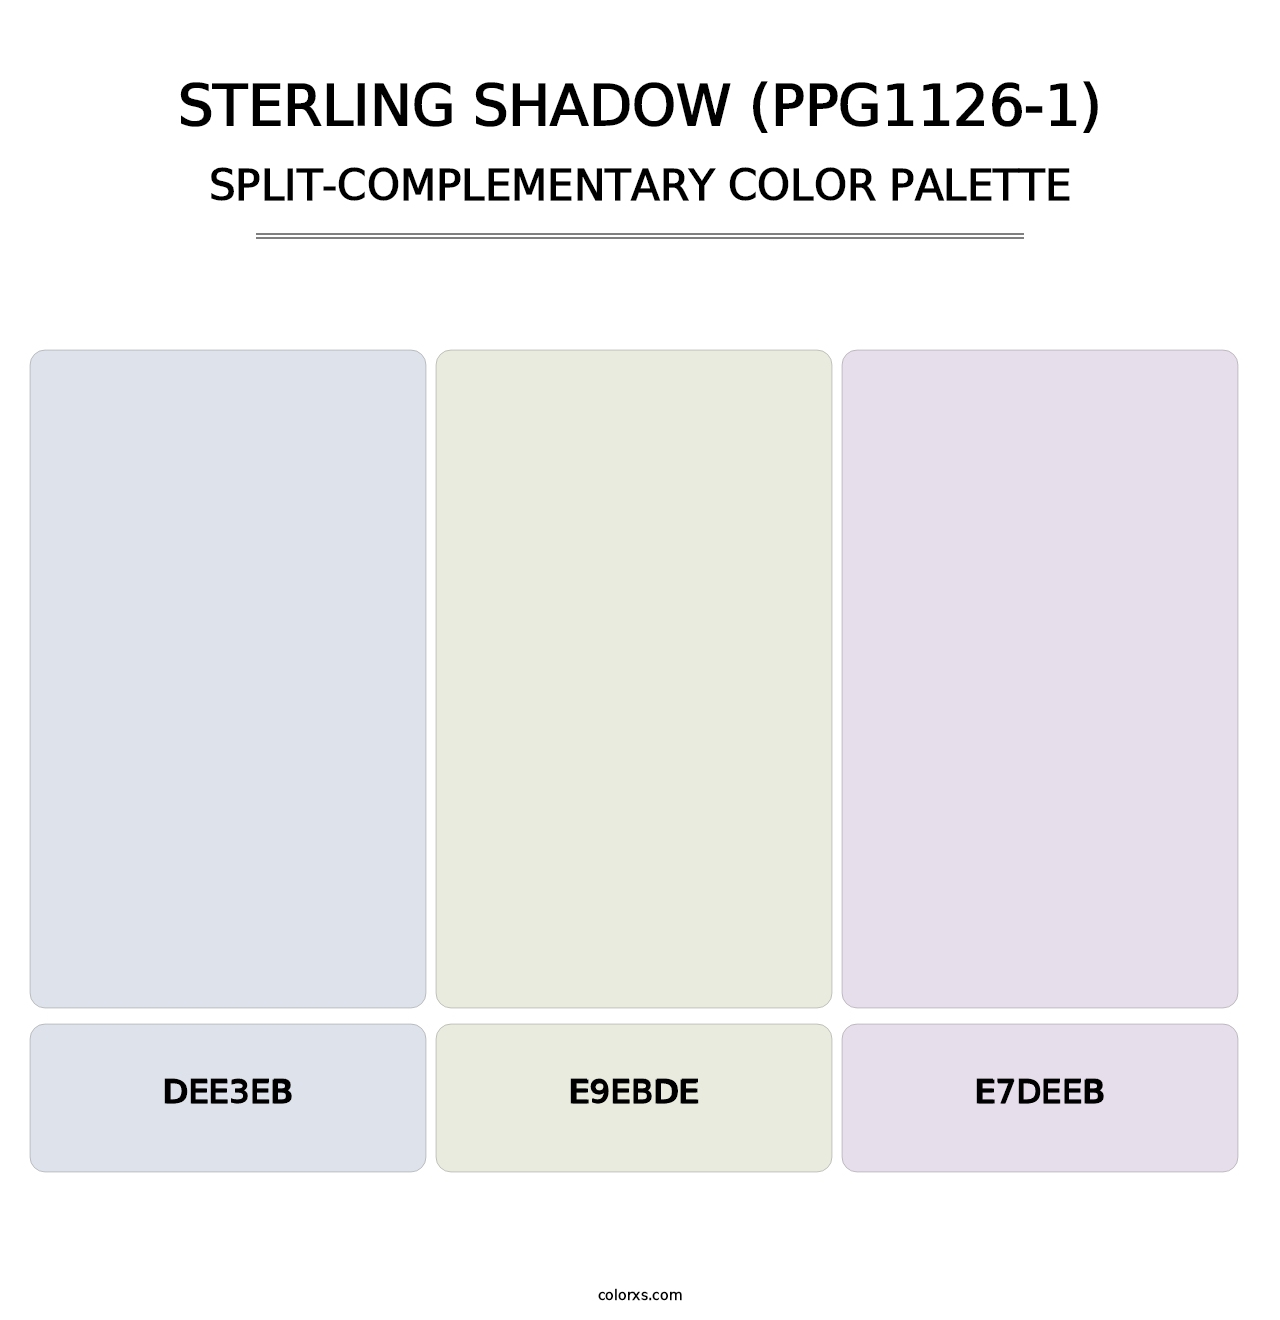 Sterling Shadow (PPG1126-1) - Split-Complementary Color Palette